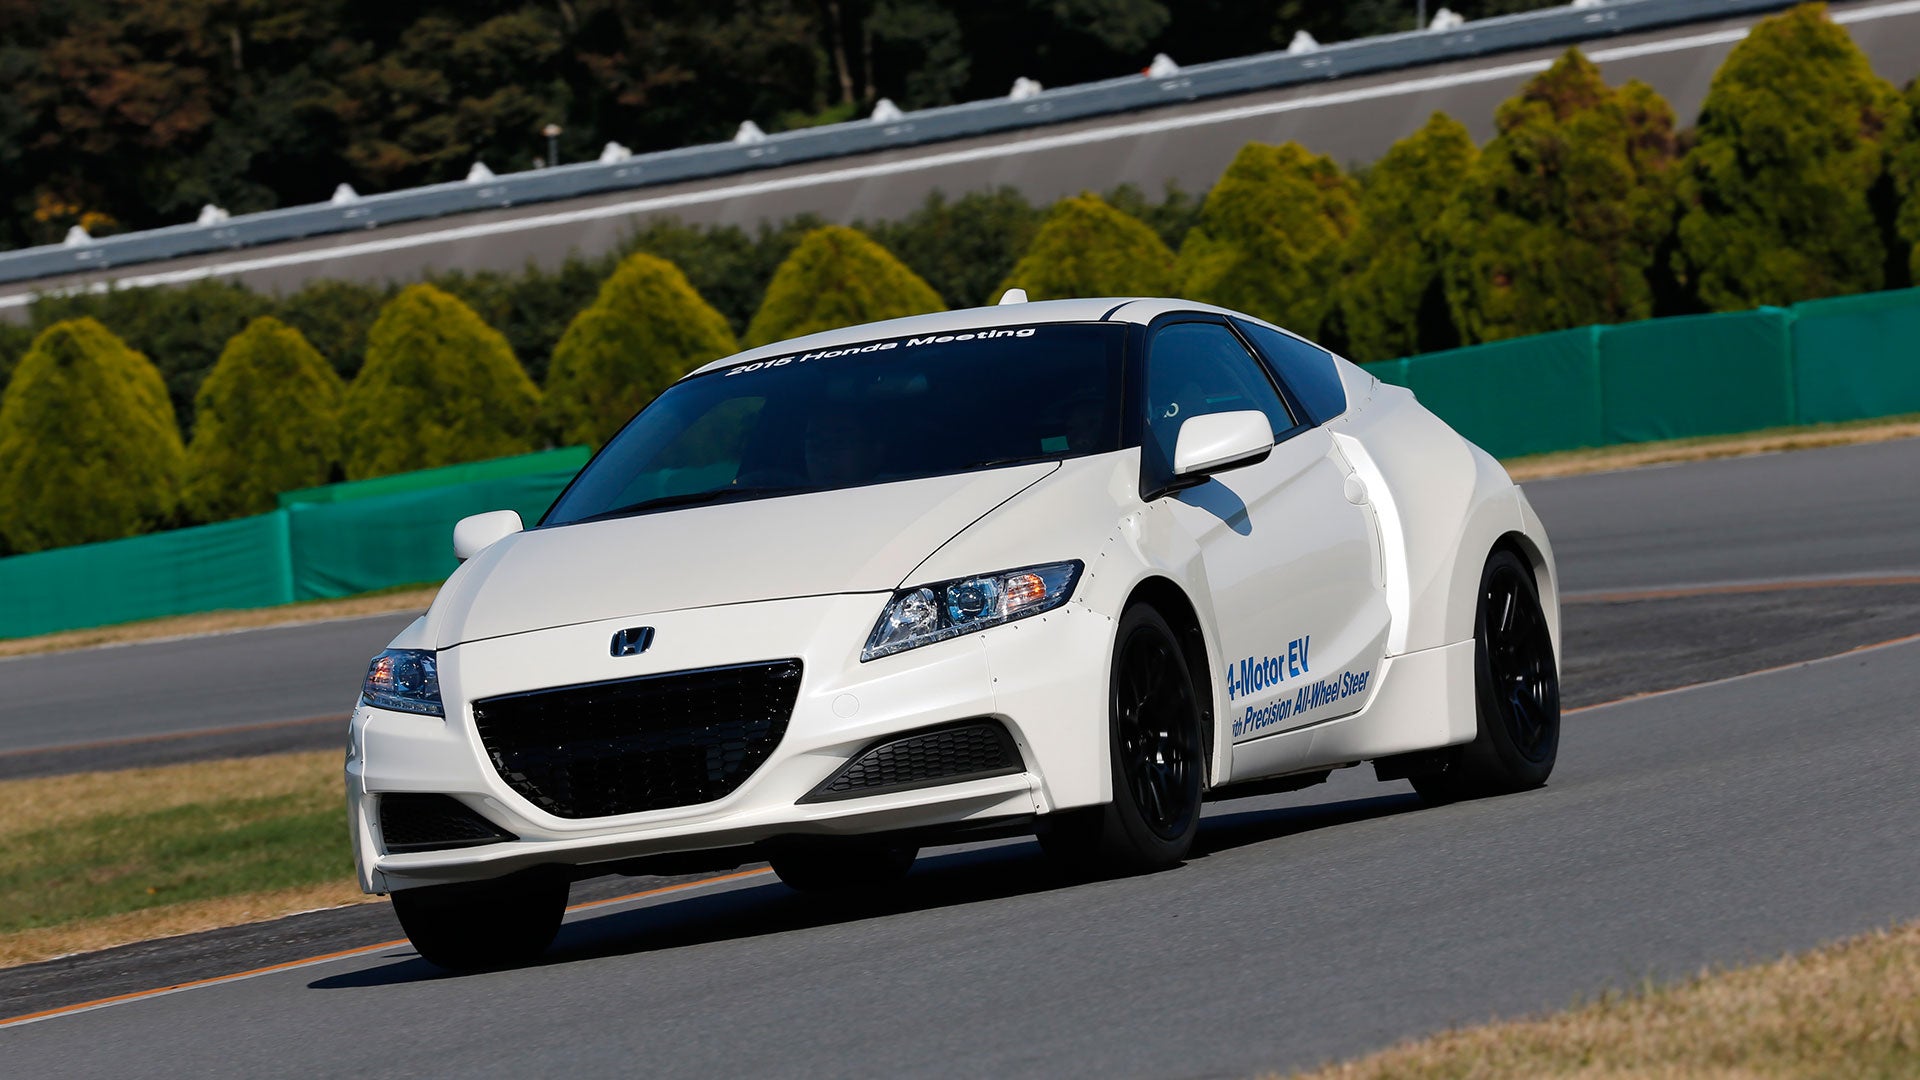 The CR-Z 4-Motor Electric Car Is the Honda That Honda Should Build